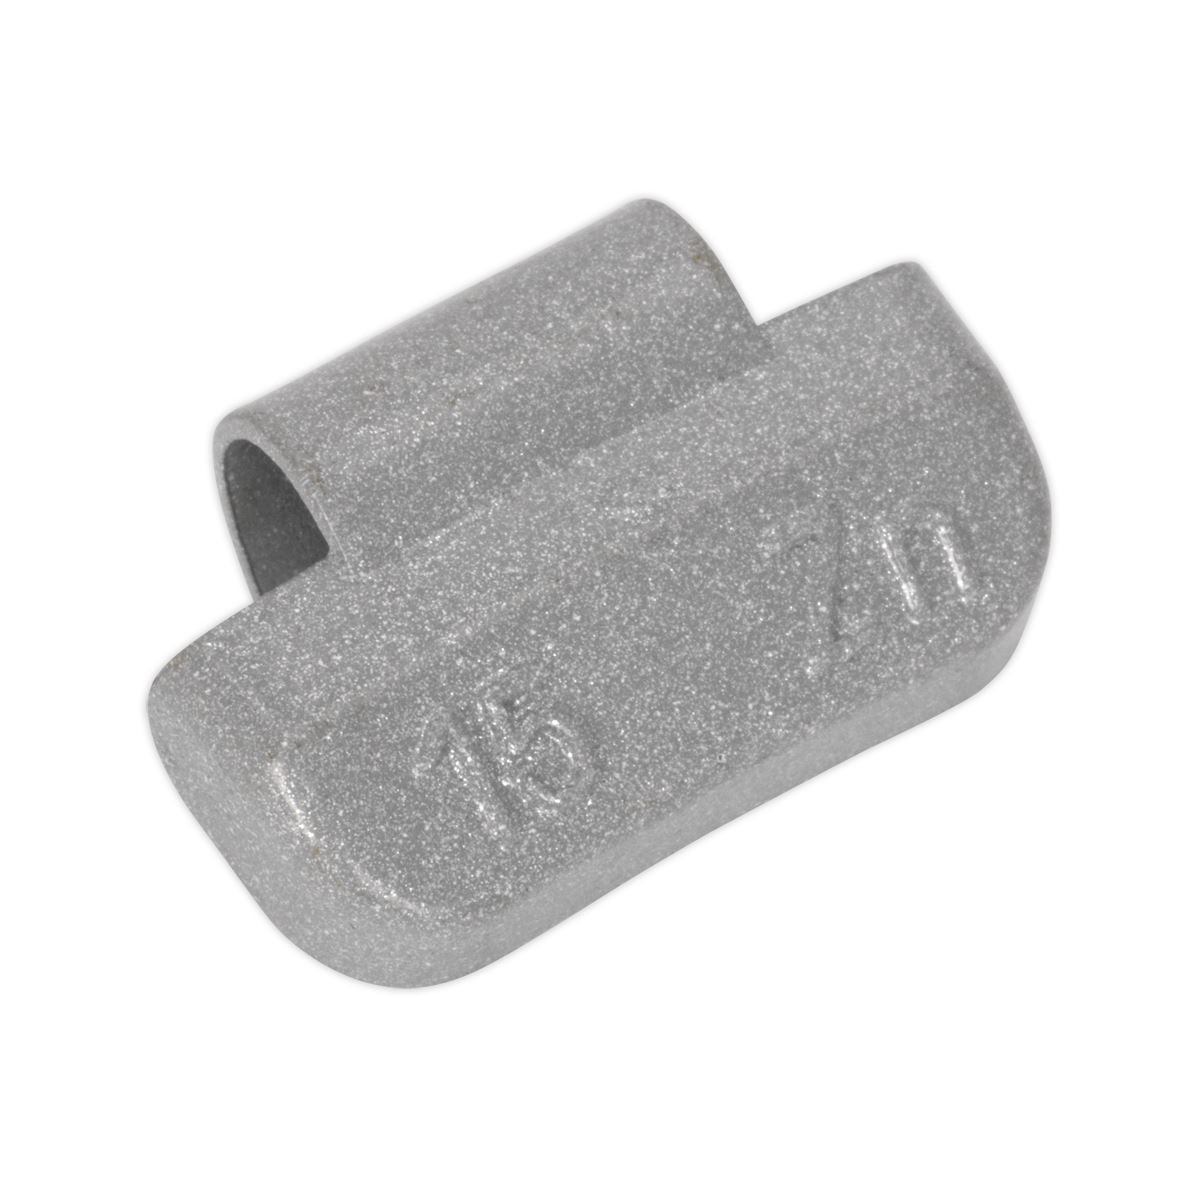 Sealey Wheel Weight 15g Hammer-On Plastic Coated Zinc for Alloy Wheels Pack of 100